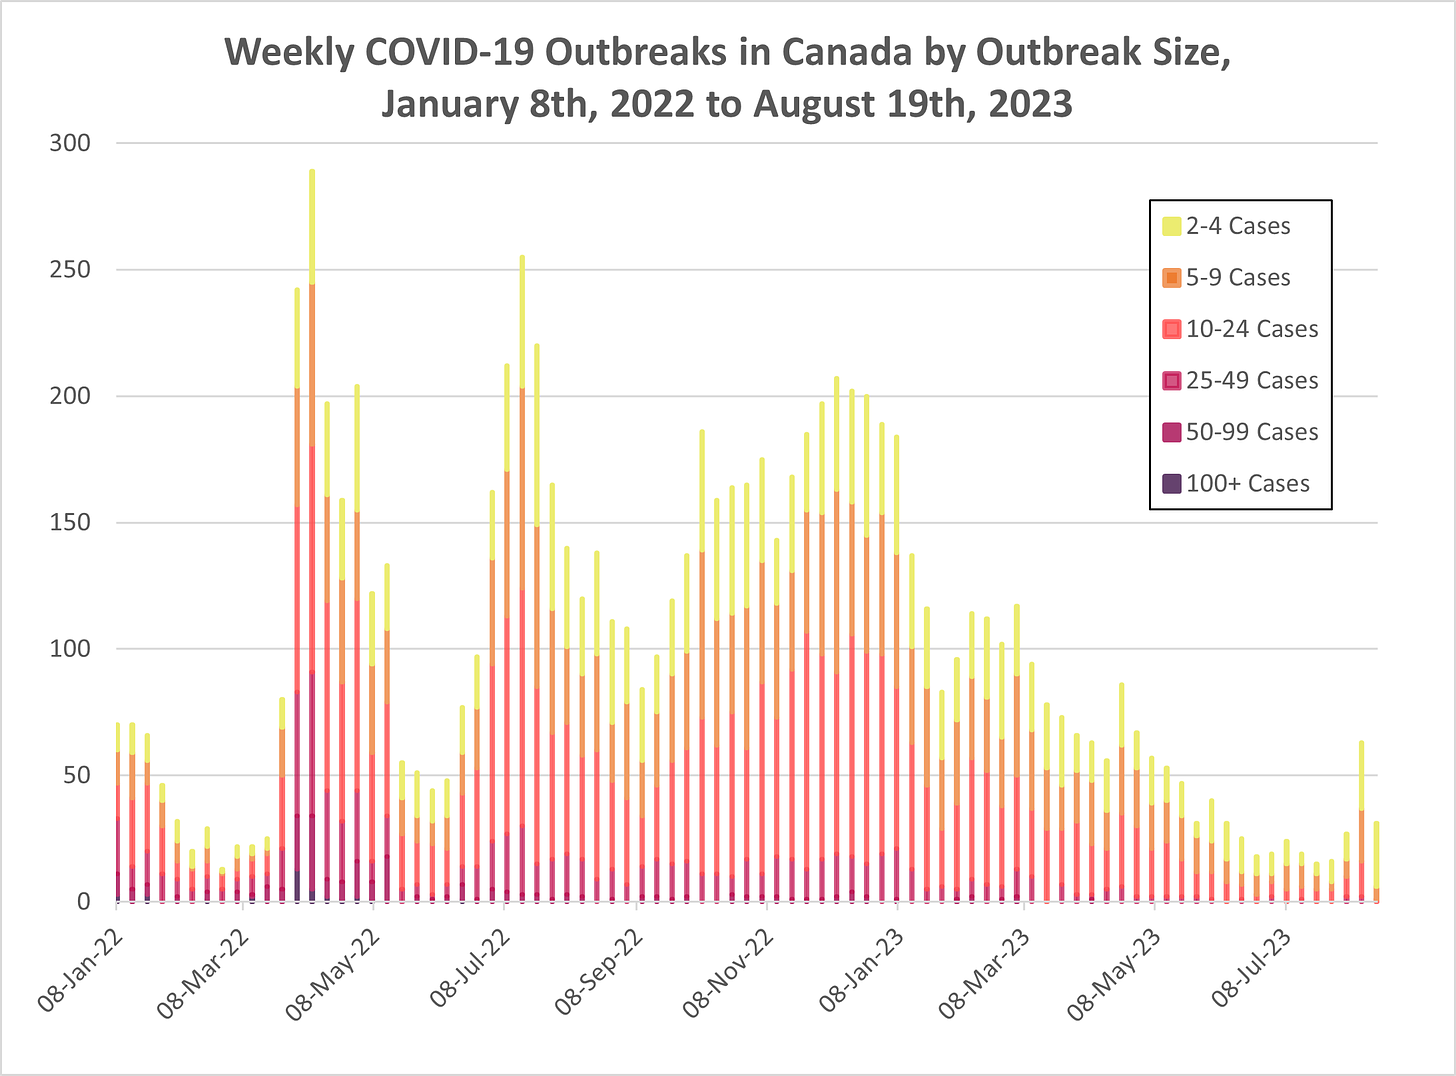 Stacked bar chart of weekly outbreaks by outbreak size (2-4 cases, 5-9 cases, 10-24 cases, 25-49 cases, 50-99 cases, 100+ cases) in Canada from January 8th, 2022 to August 19th, 2023. Rates begin at around 70, return to low levels, spike to around 300 in April 2022, return to lower levels though higher than the previous lull, spike again to around 250 in Summer 2022 then decrease to around 100 (a much higher lull), remain around 150-200 from October 2022 to January 2023, then from 50-100 until May 2023, then decrease to around 25 by mid-July. The figure shoots up to around 70 in the second-to-last week, and down to around 35 in the most recent week.